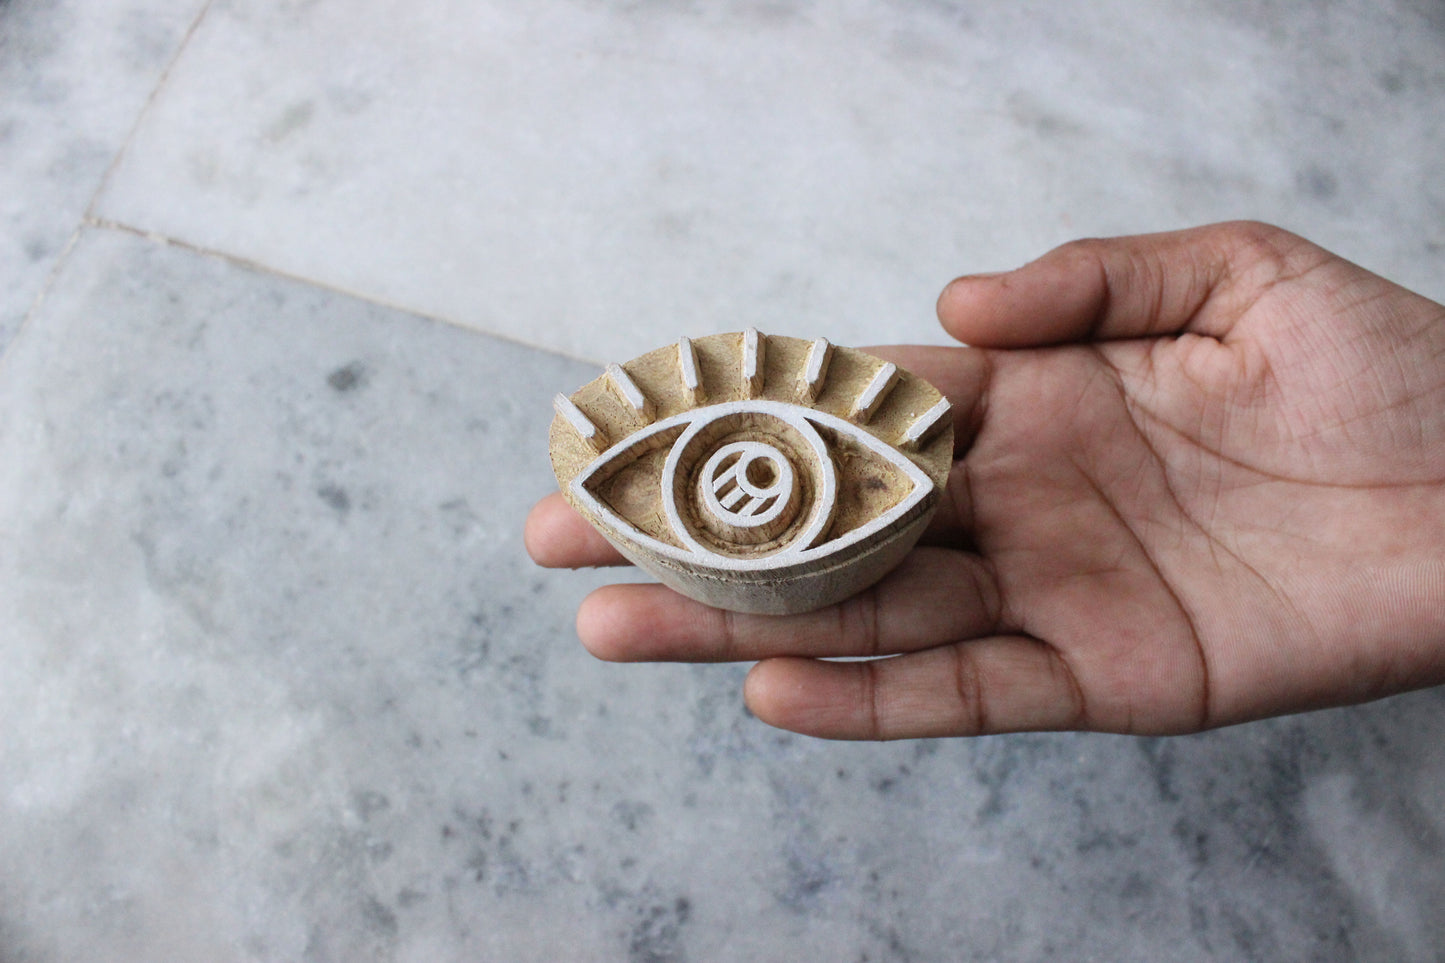 Eye Fabric Stamp Carve Block Fabric Stamp Handmade Block Print Stamp Indian Wooden Stamp For Printing Indian Soap Making Stamp Traditional Wooden Block